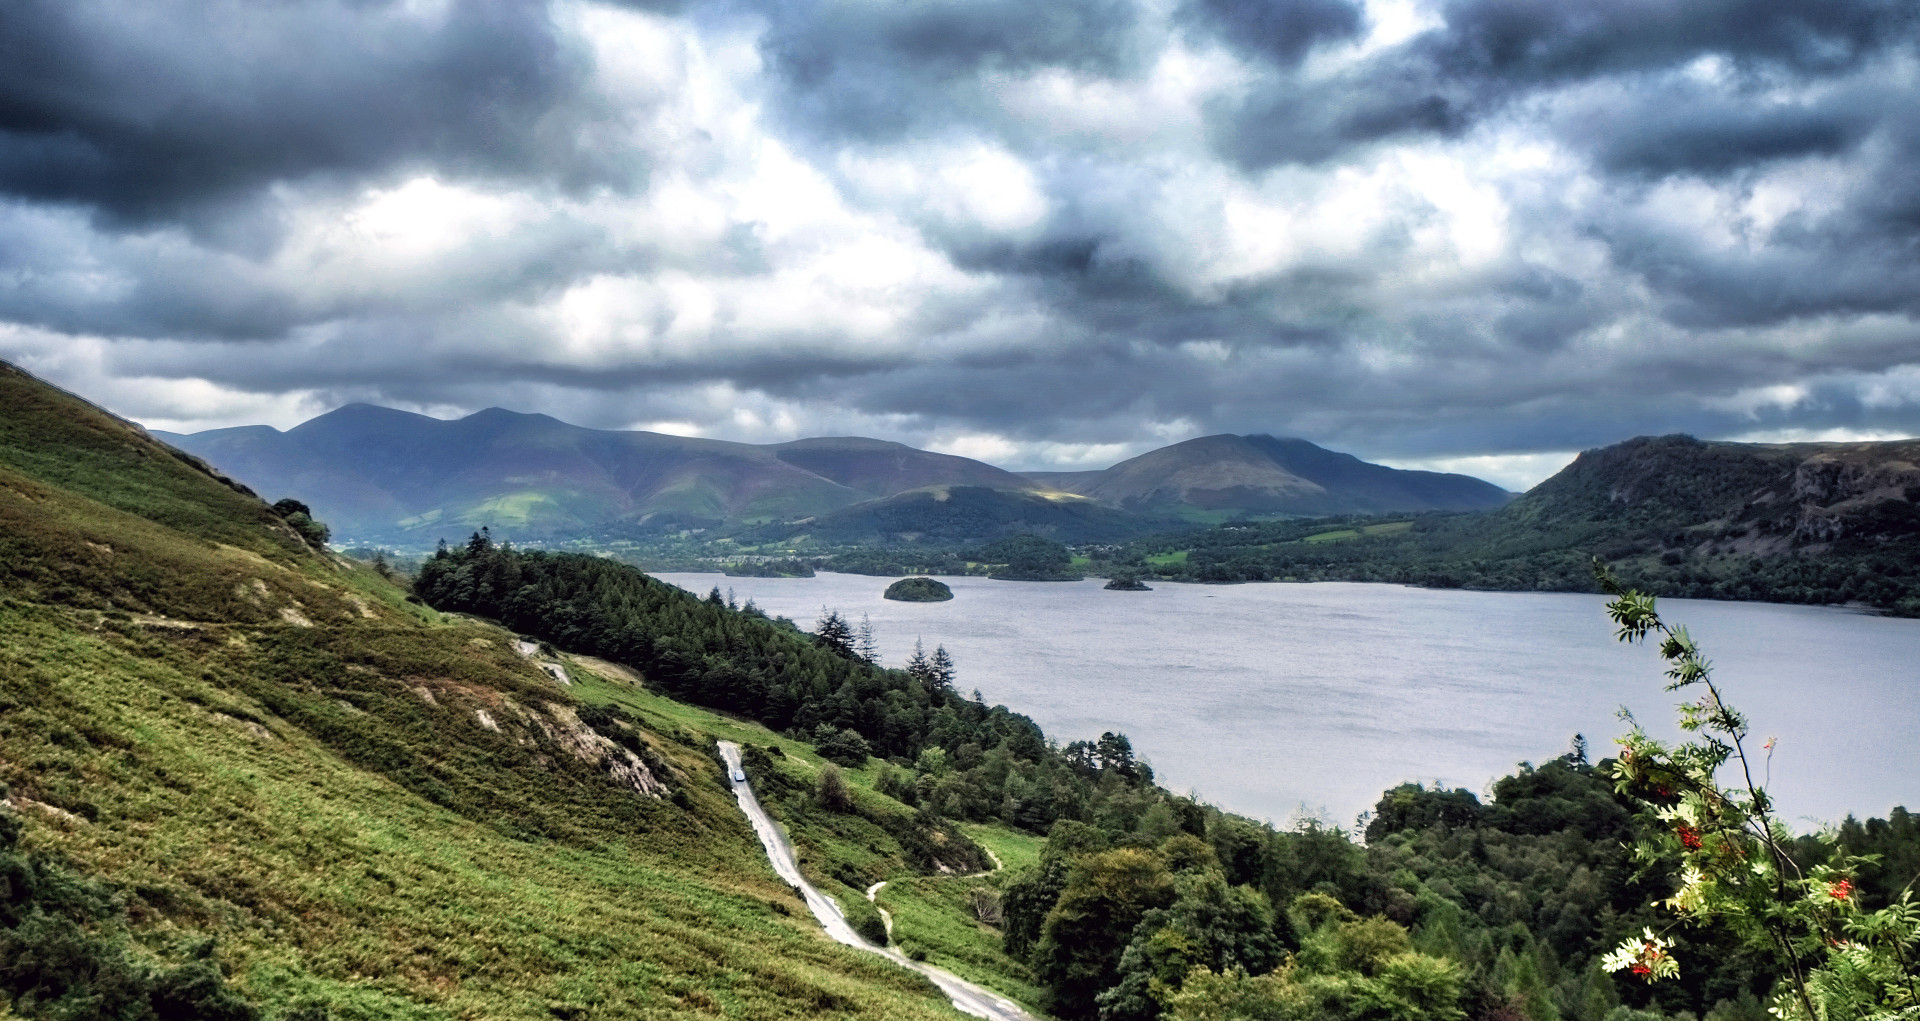 The drive is only around 20 minutes but there are plenty of stop-off points, like Derwent Water.<p>You may also like:<a href="https://www.starsinsider.com/n/274925?utm_source=msn.com&utm_medium=display&utm_campaign=referral_description&utm_content=162752v2en-en"> Celebrities reveal their phobias and greatest fears</a></p>